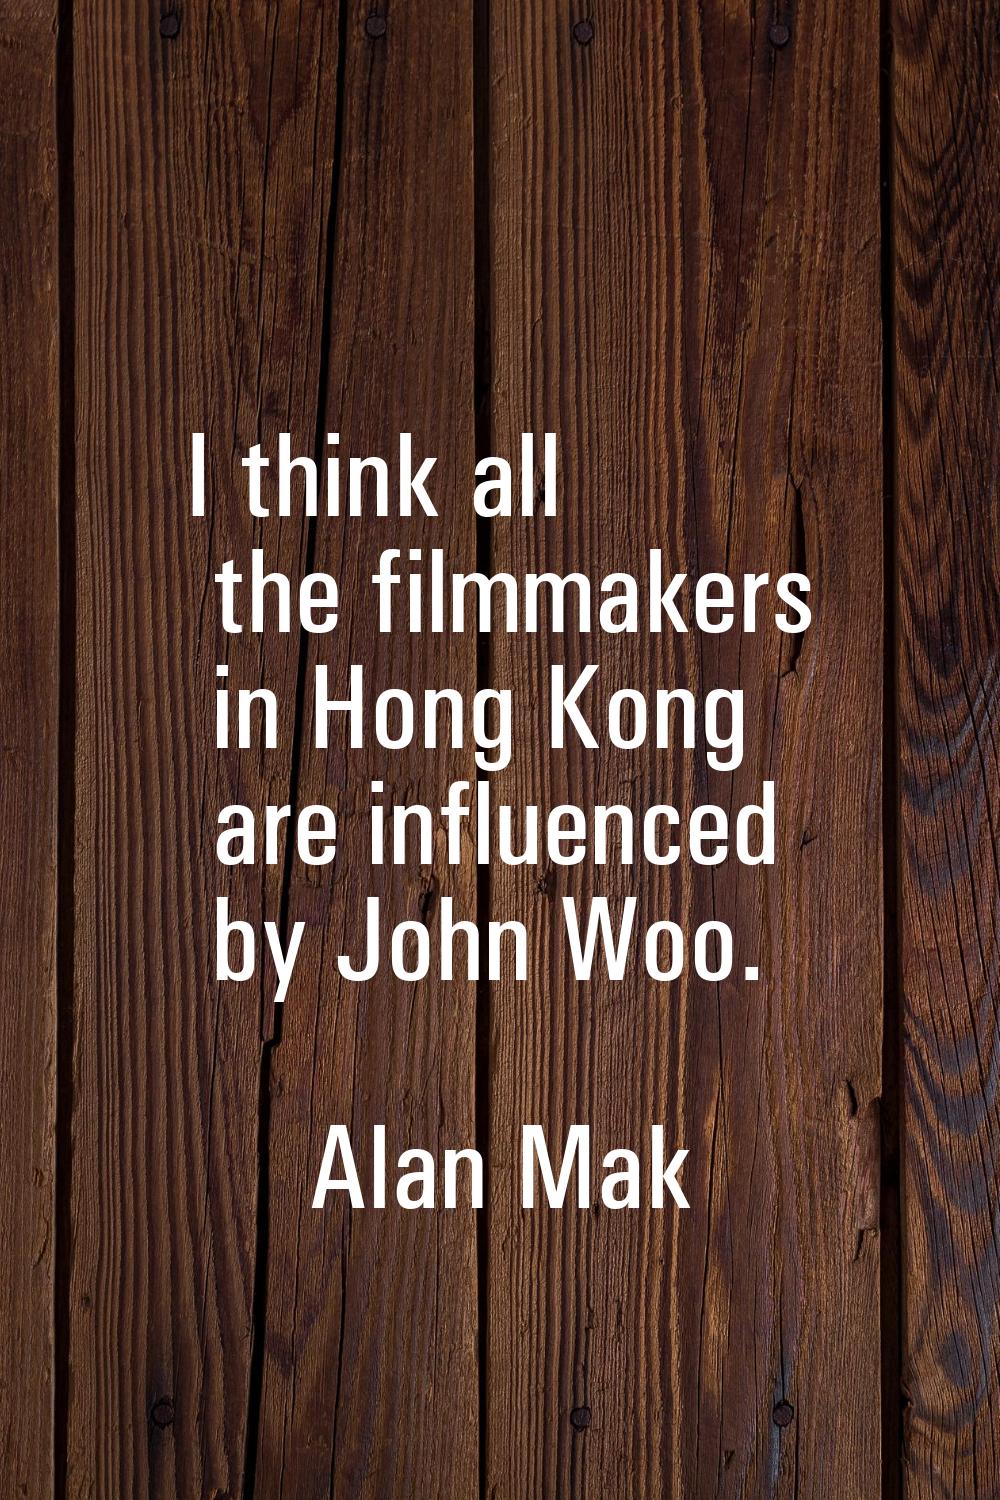 I think all the filmmakers in Hong Kong are influenced by John Woo.